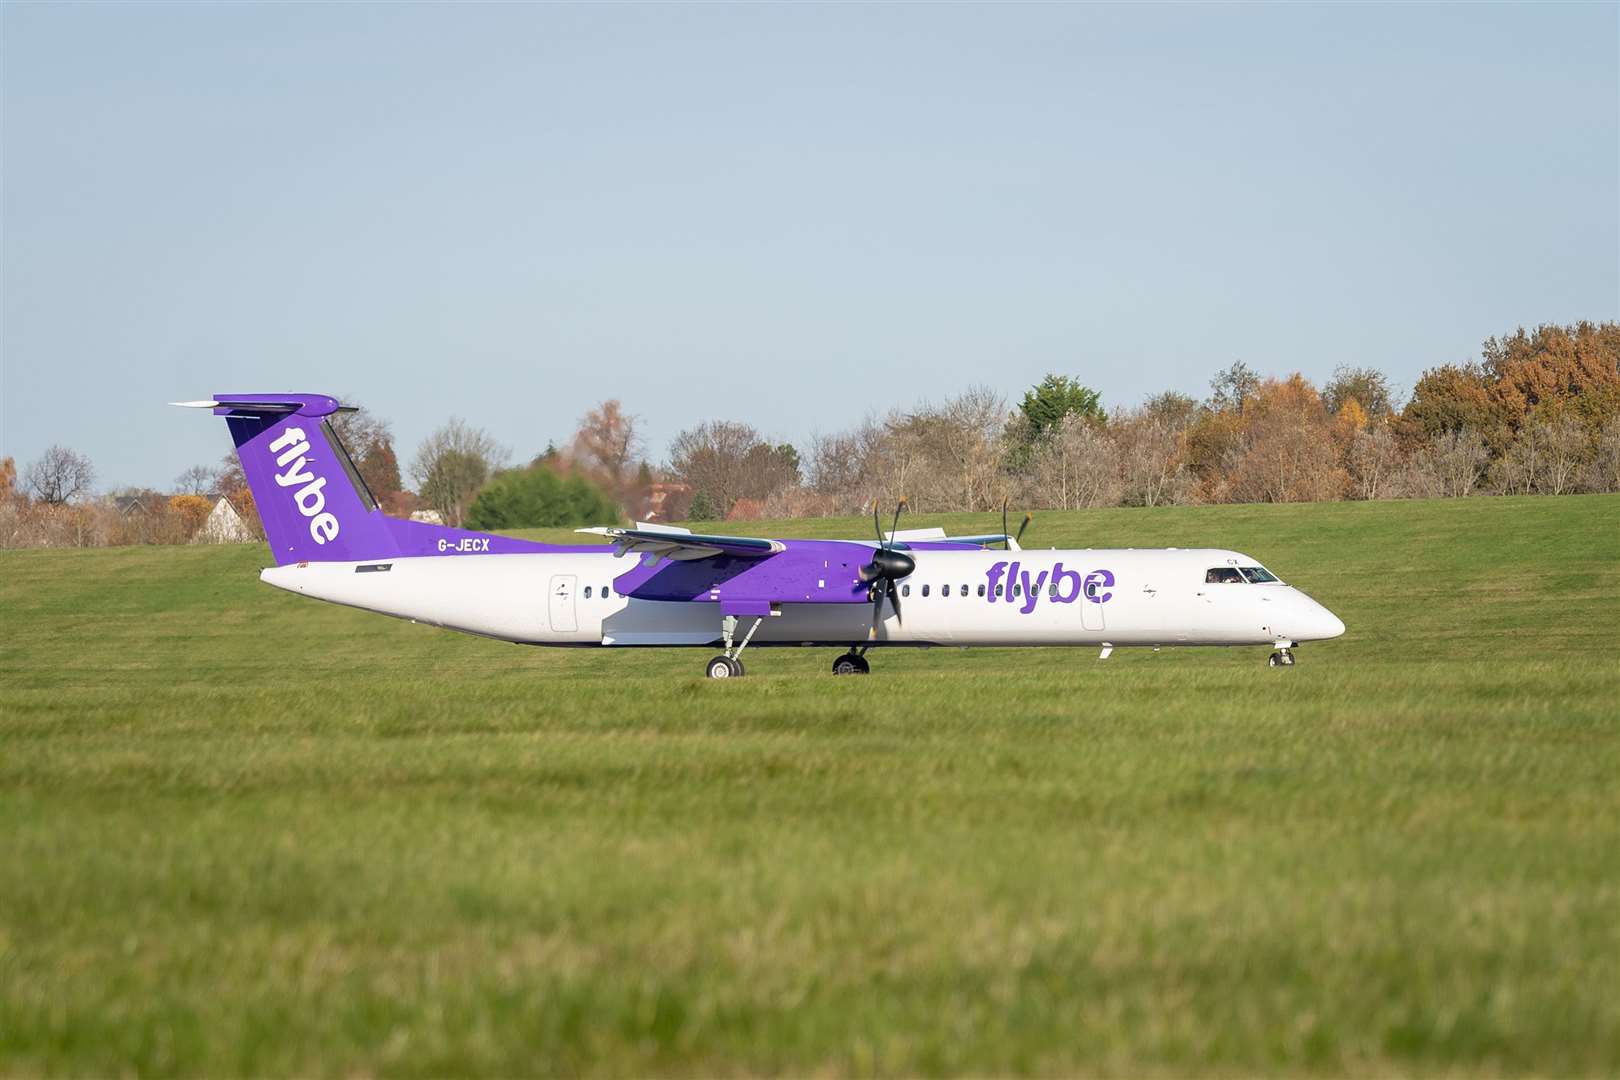 Flybe will be operating flights between Inverness and Belfast at least four times a week.